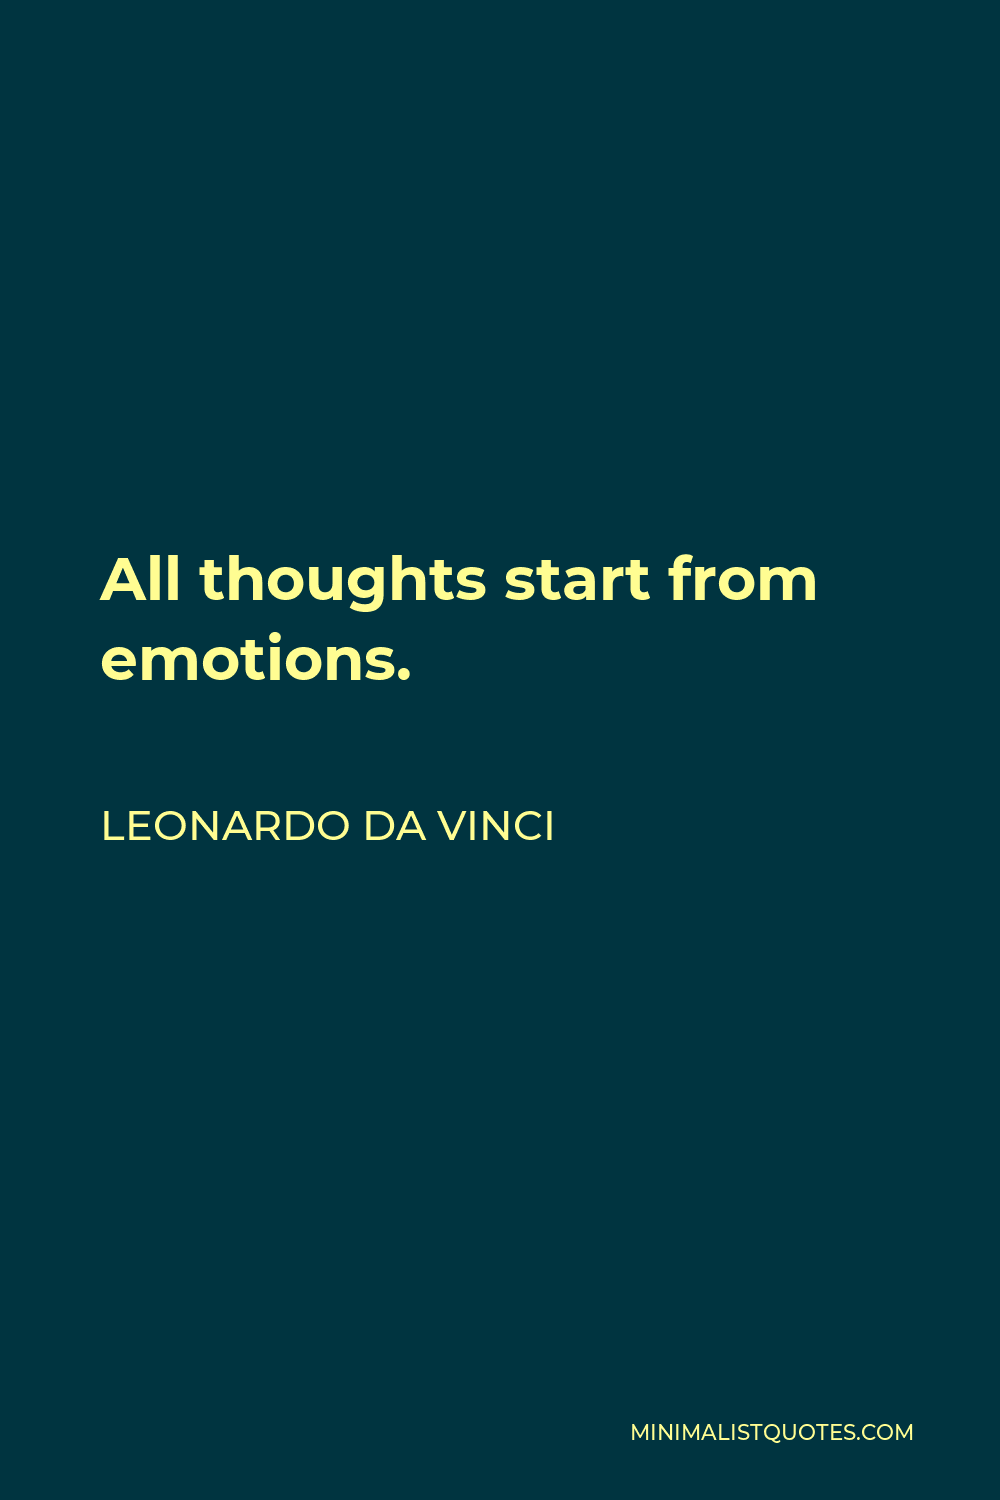 Leonardo da Vinci Quote - All thoughts start from emotions.